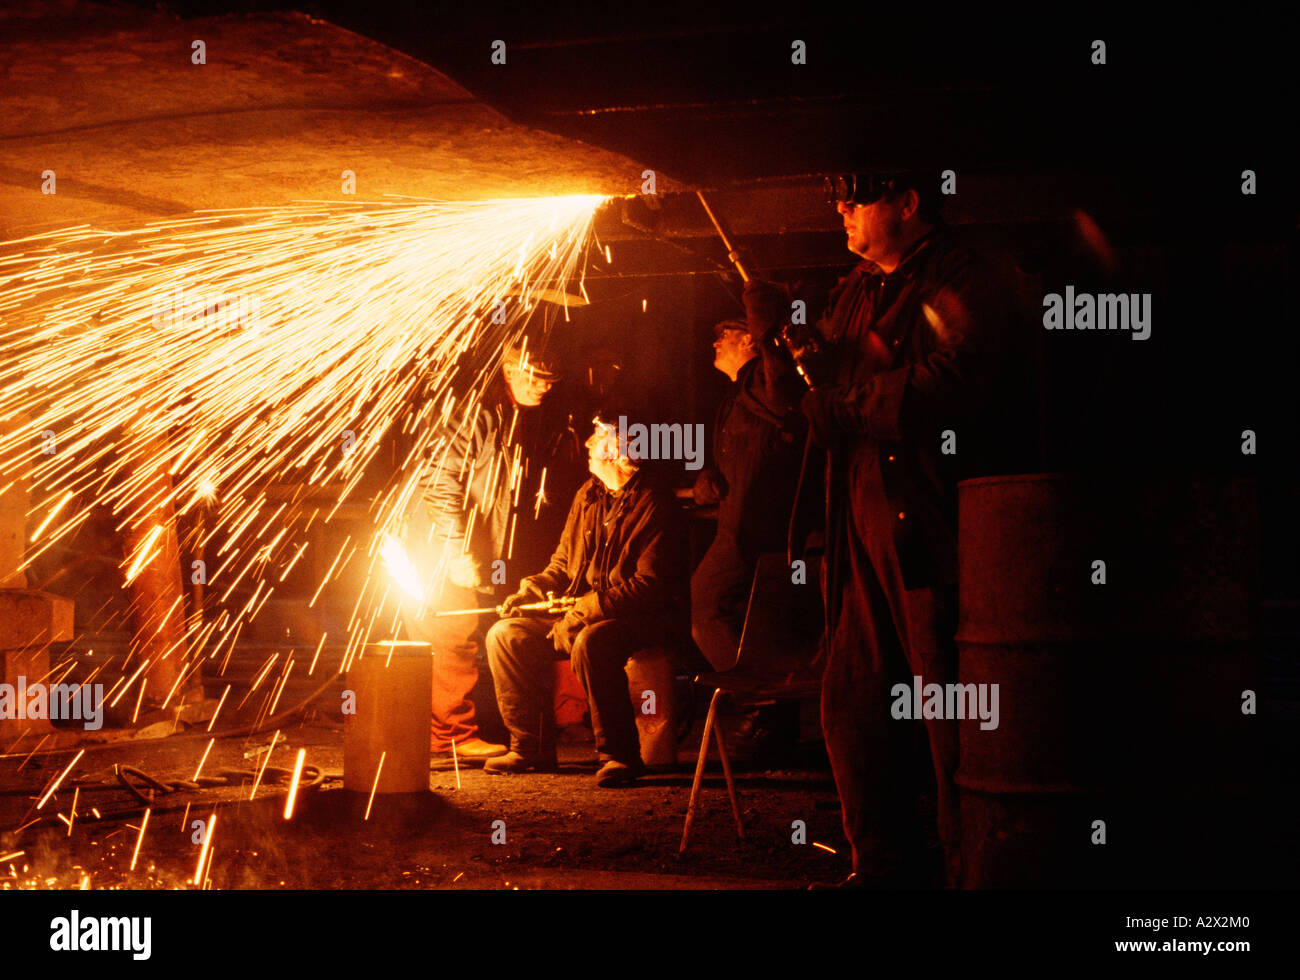 United Kingdom. Men working in ship building yard welding with oxyacetylene torch. Stock Photo